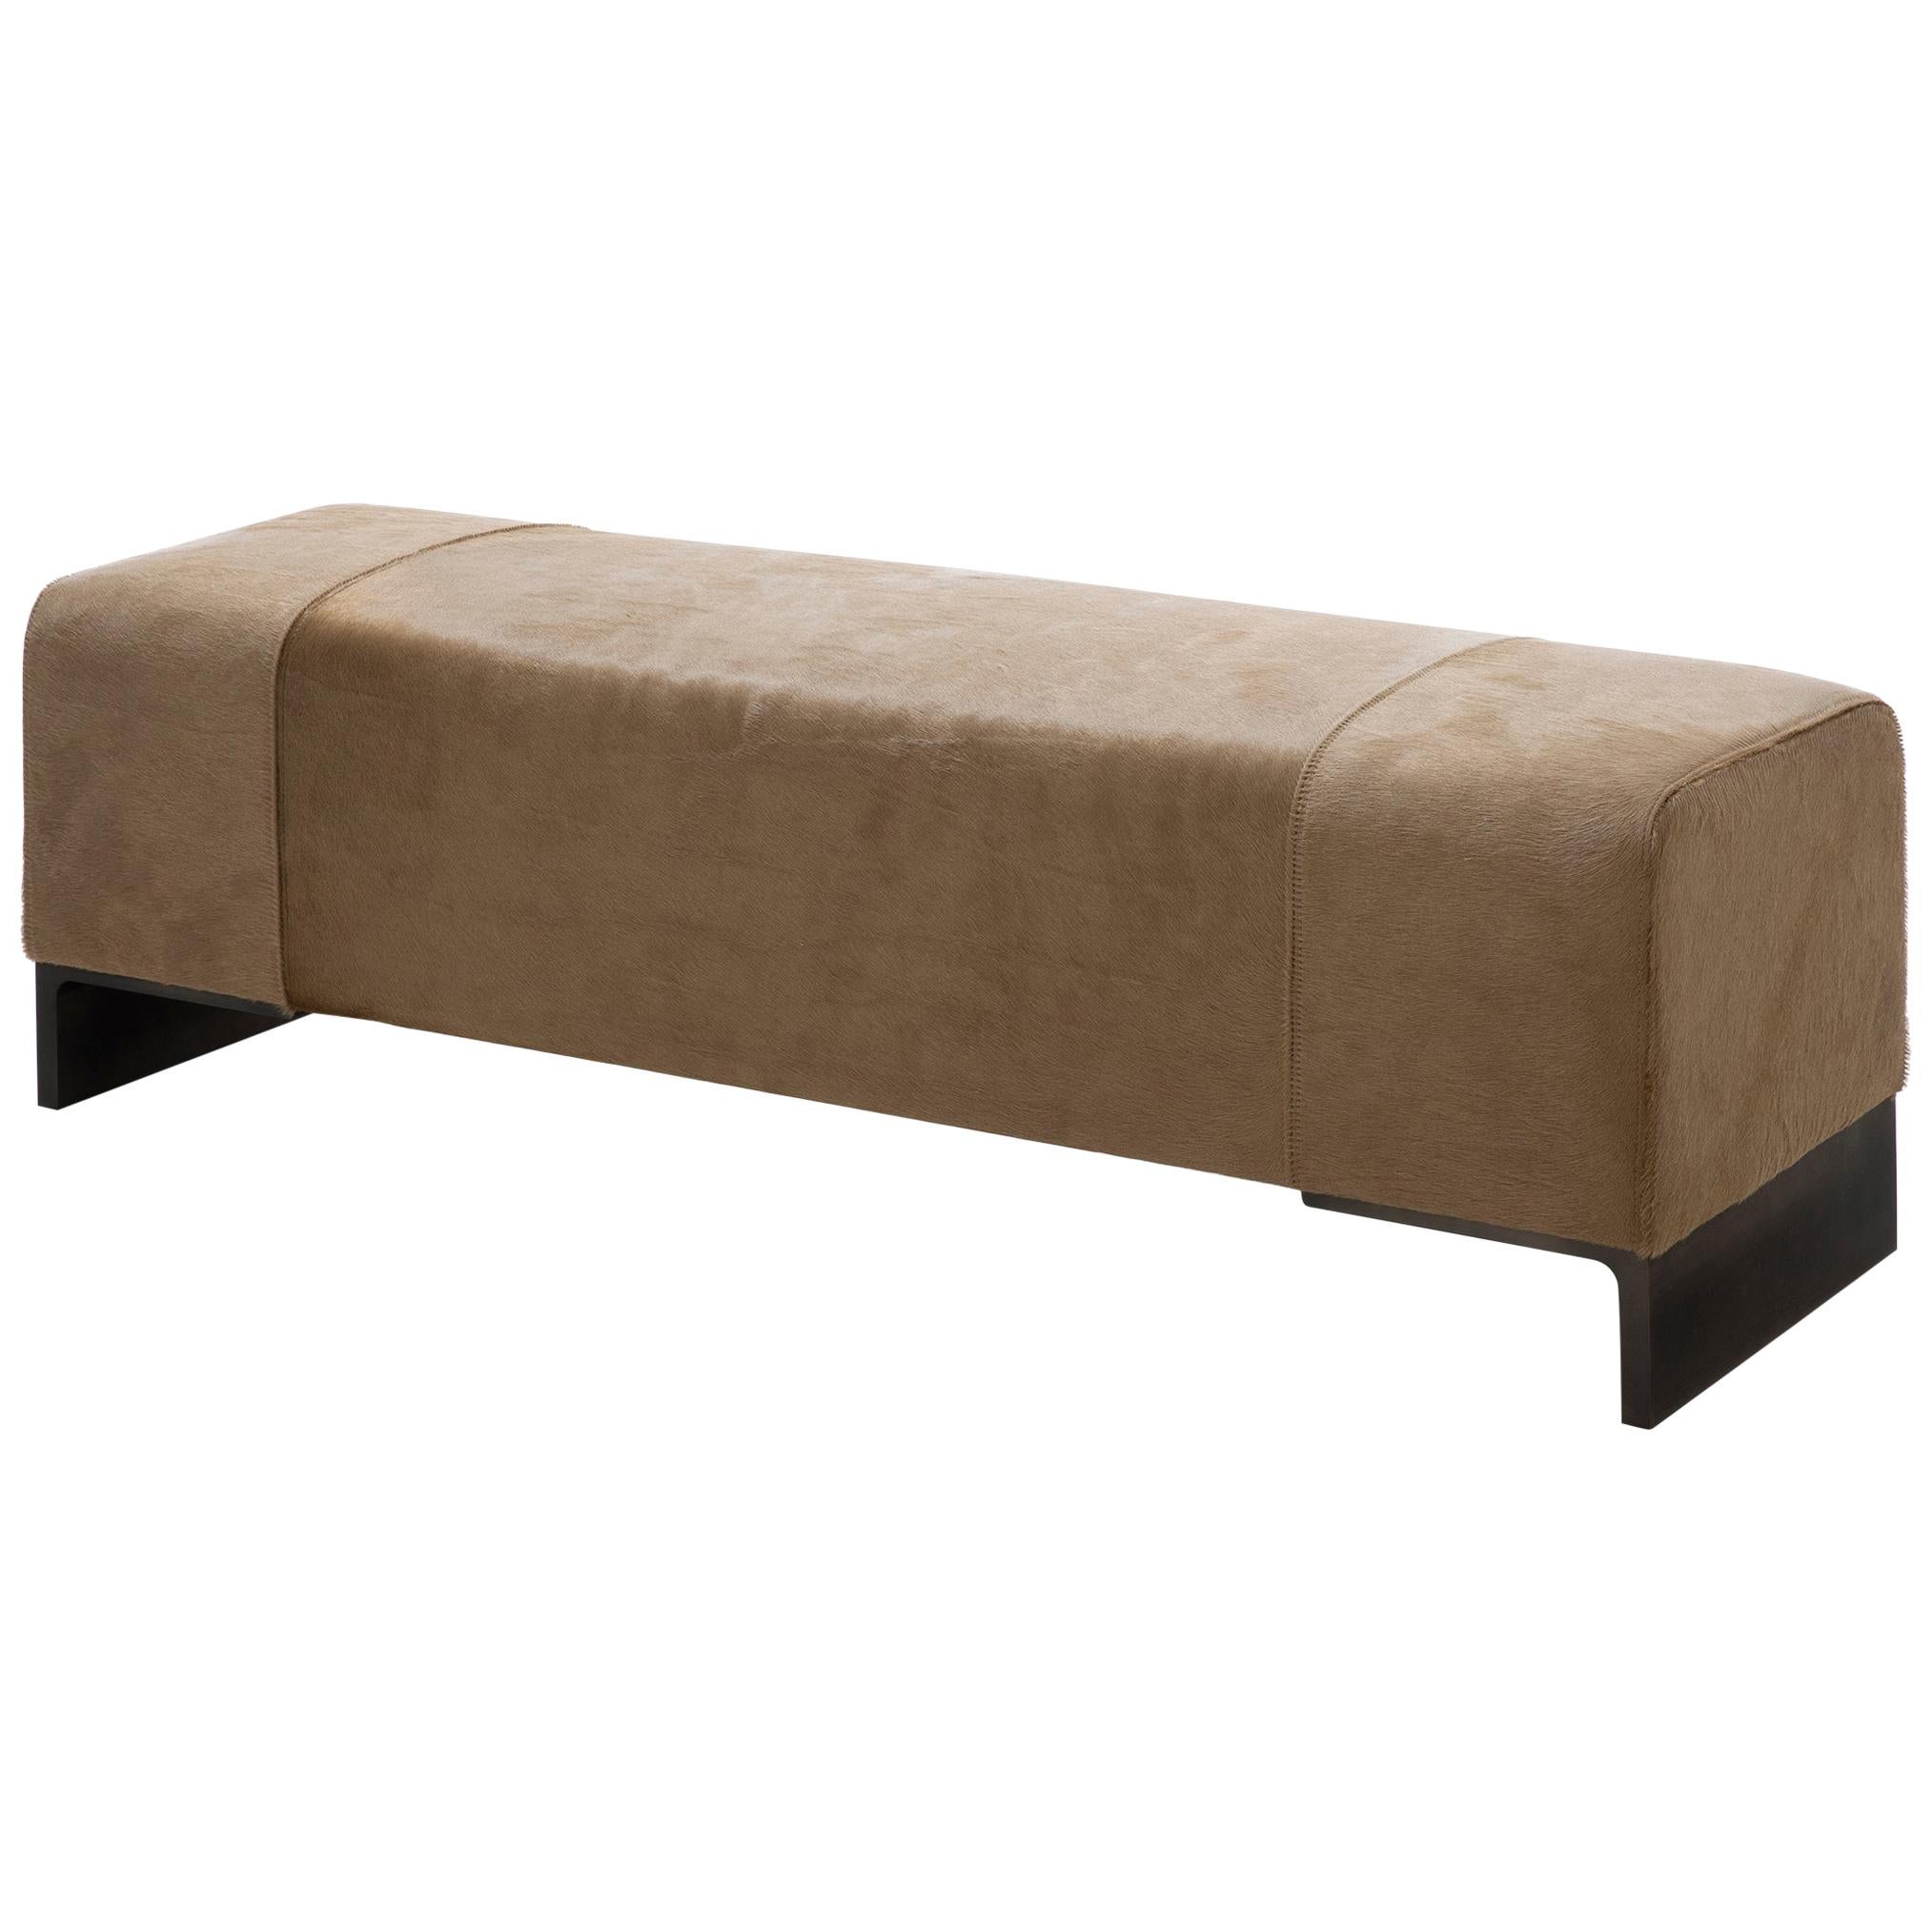 HOLLY HUNT Arakan Bench in Linden Bronze Finish with Leather Upholstery